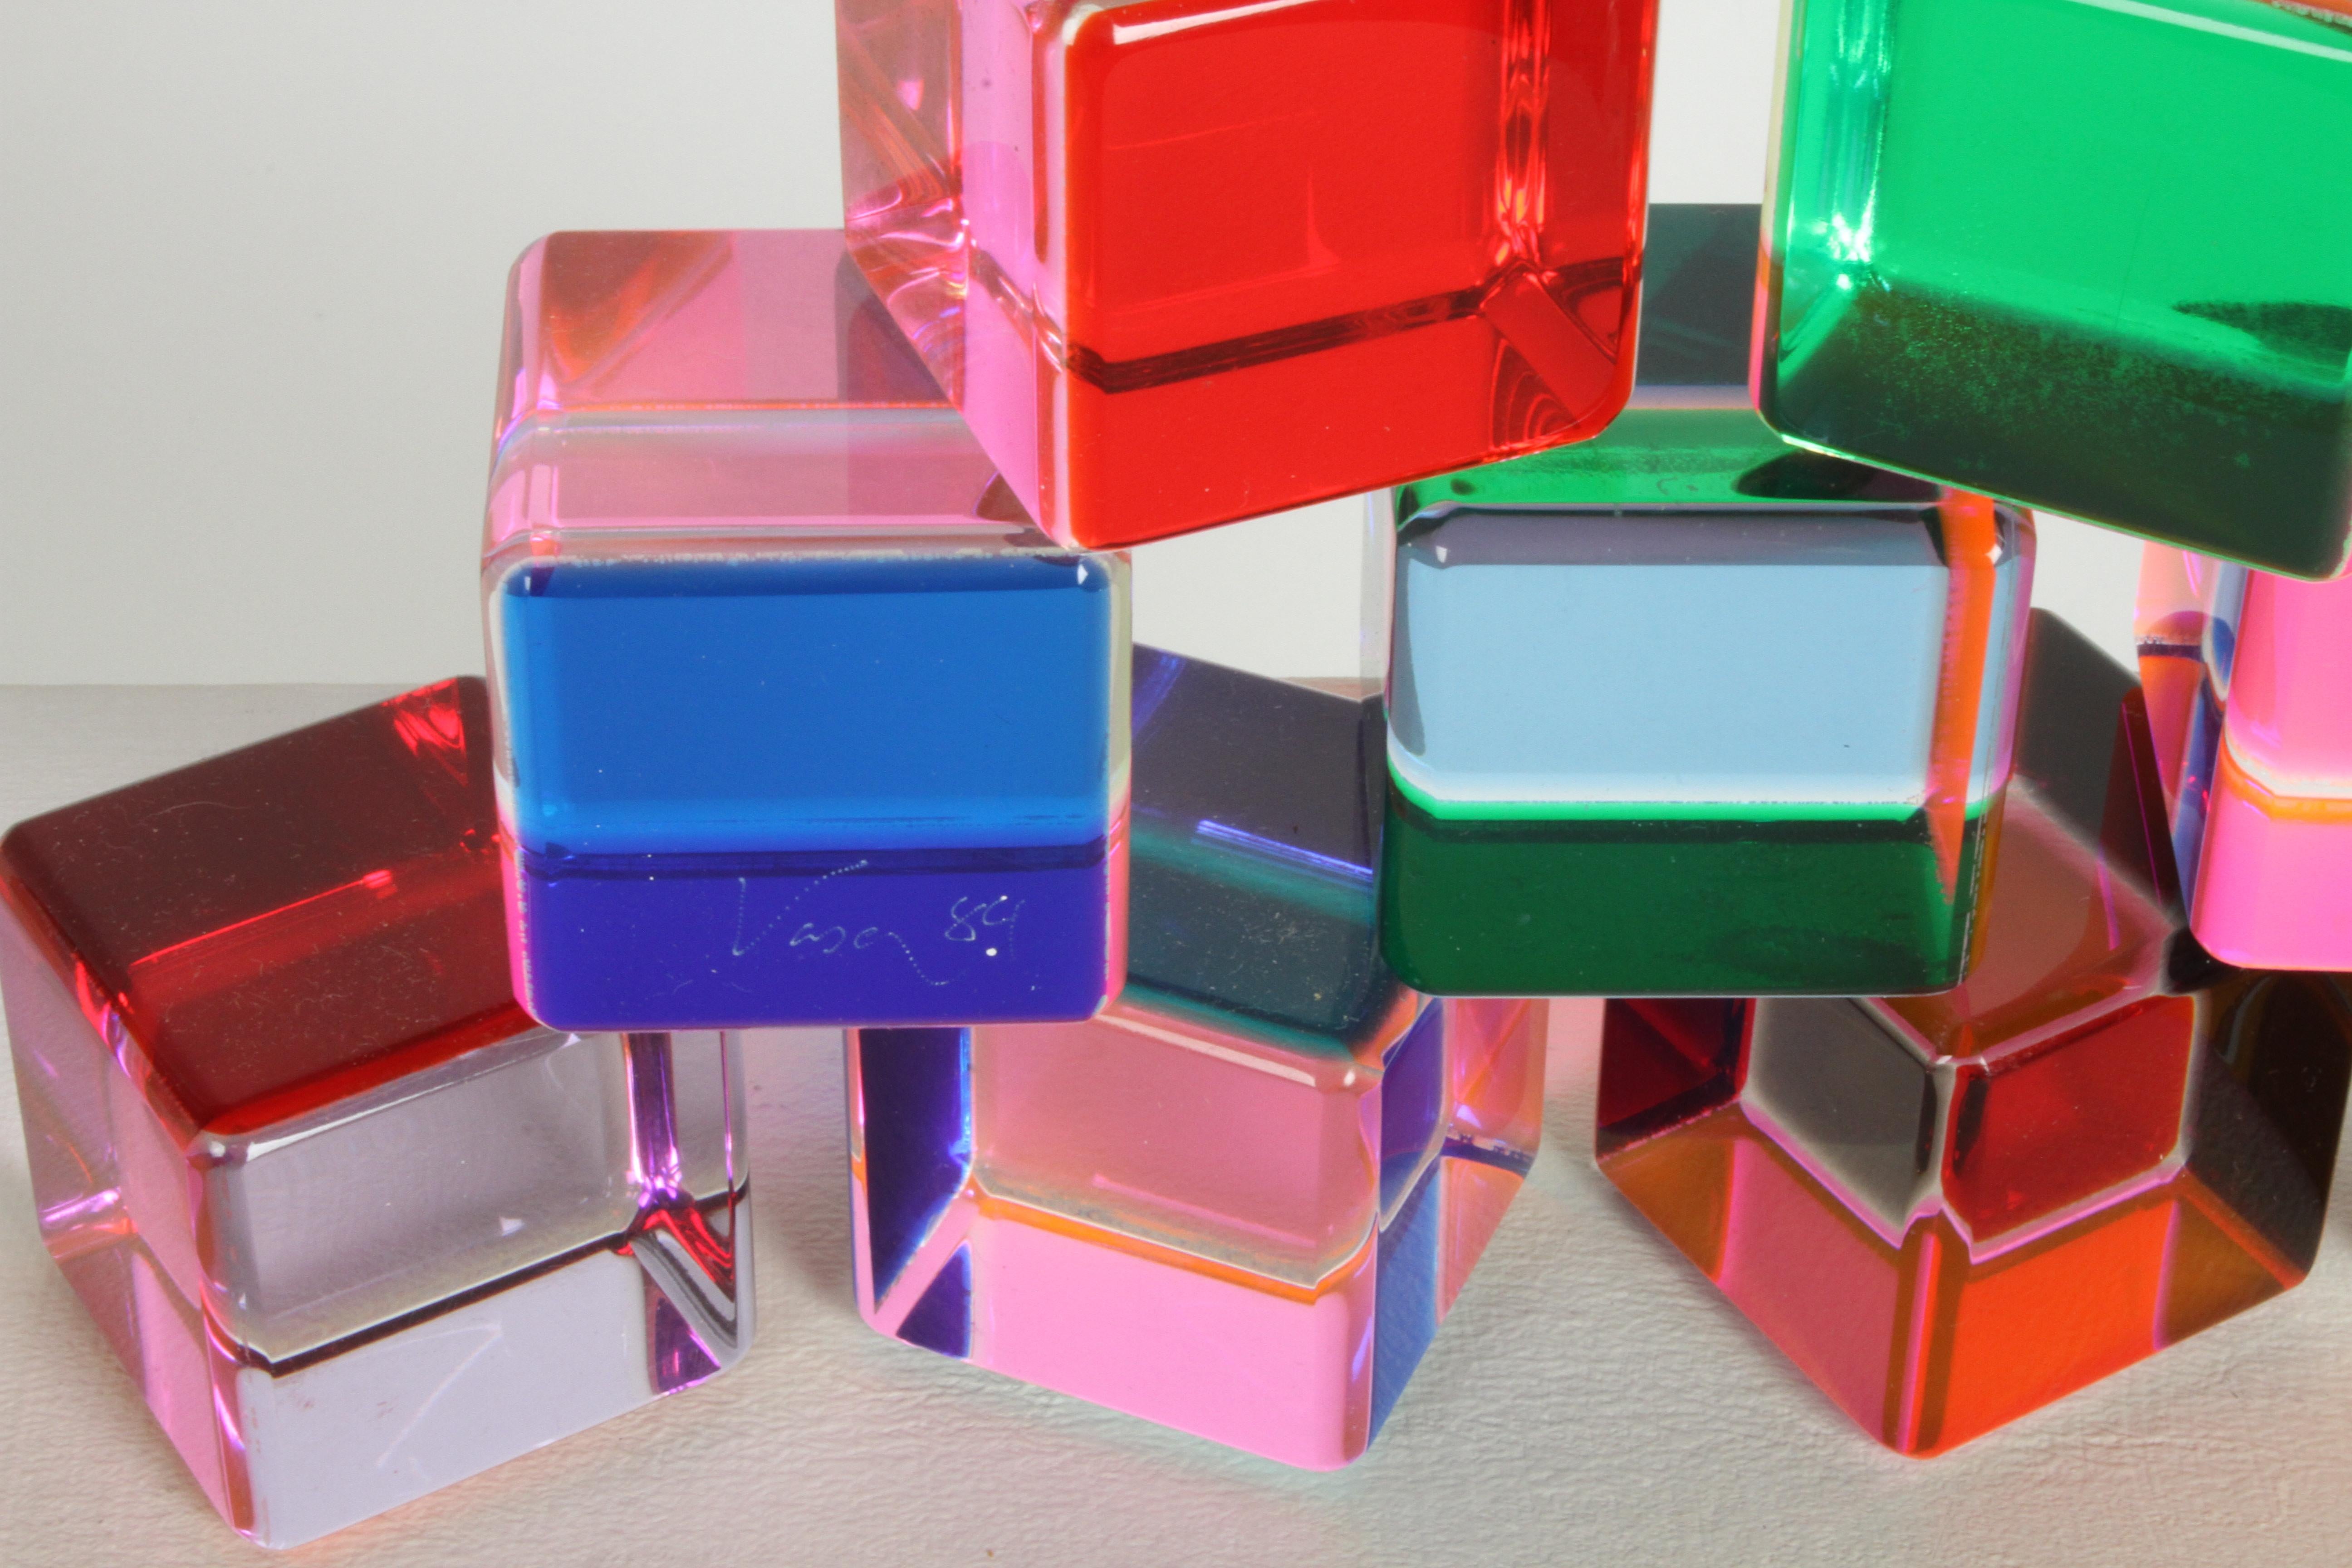 American Set of 10 Signed Vasa Mihich Lucite Laminated Op-Art Cube Sculptures Dated 1989